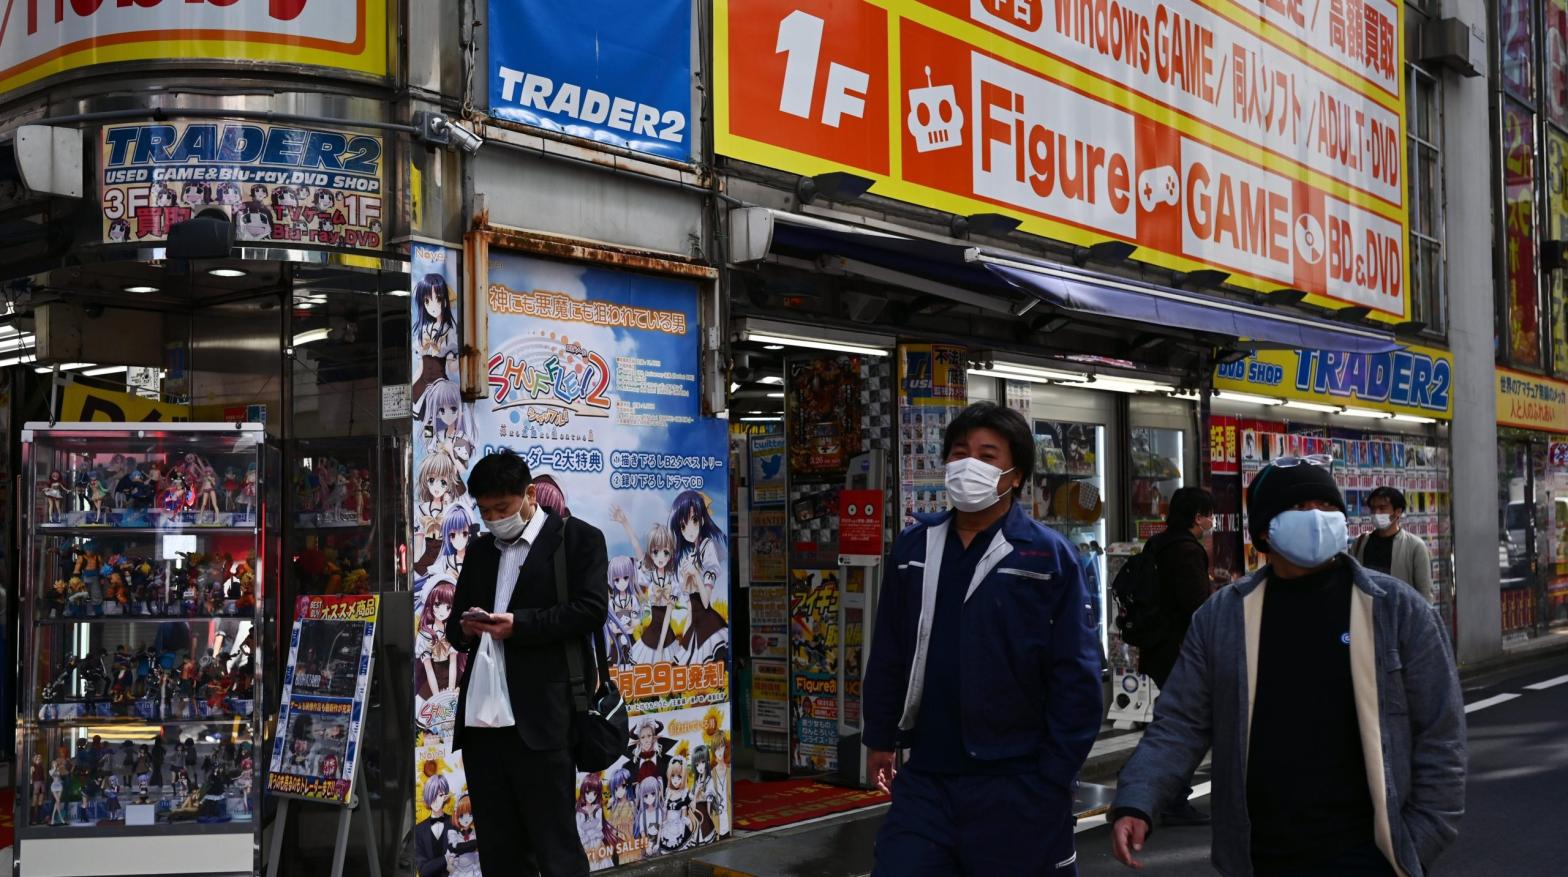 Pedestrians walking in Tokyo's famous Akihabara district, the epicentre of its retail anime and manga industry, in April 2020. In Japan, illegally downloading movies, music, manga, magazines, or academic publications can result in criminal penalties of up to two years in prison and a two million yen fine. (Photo: Charly Triballeau/AFP, Getty Images)